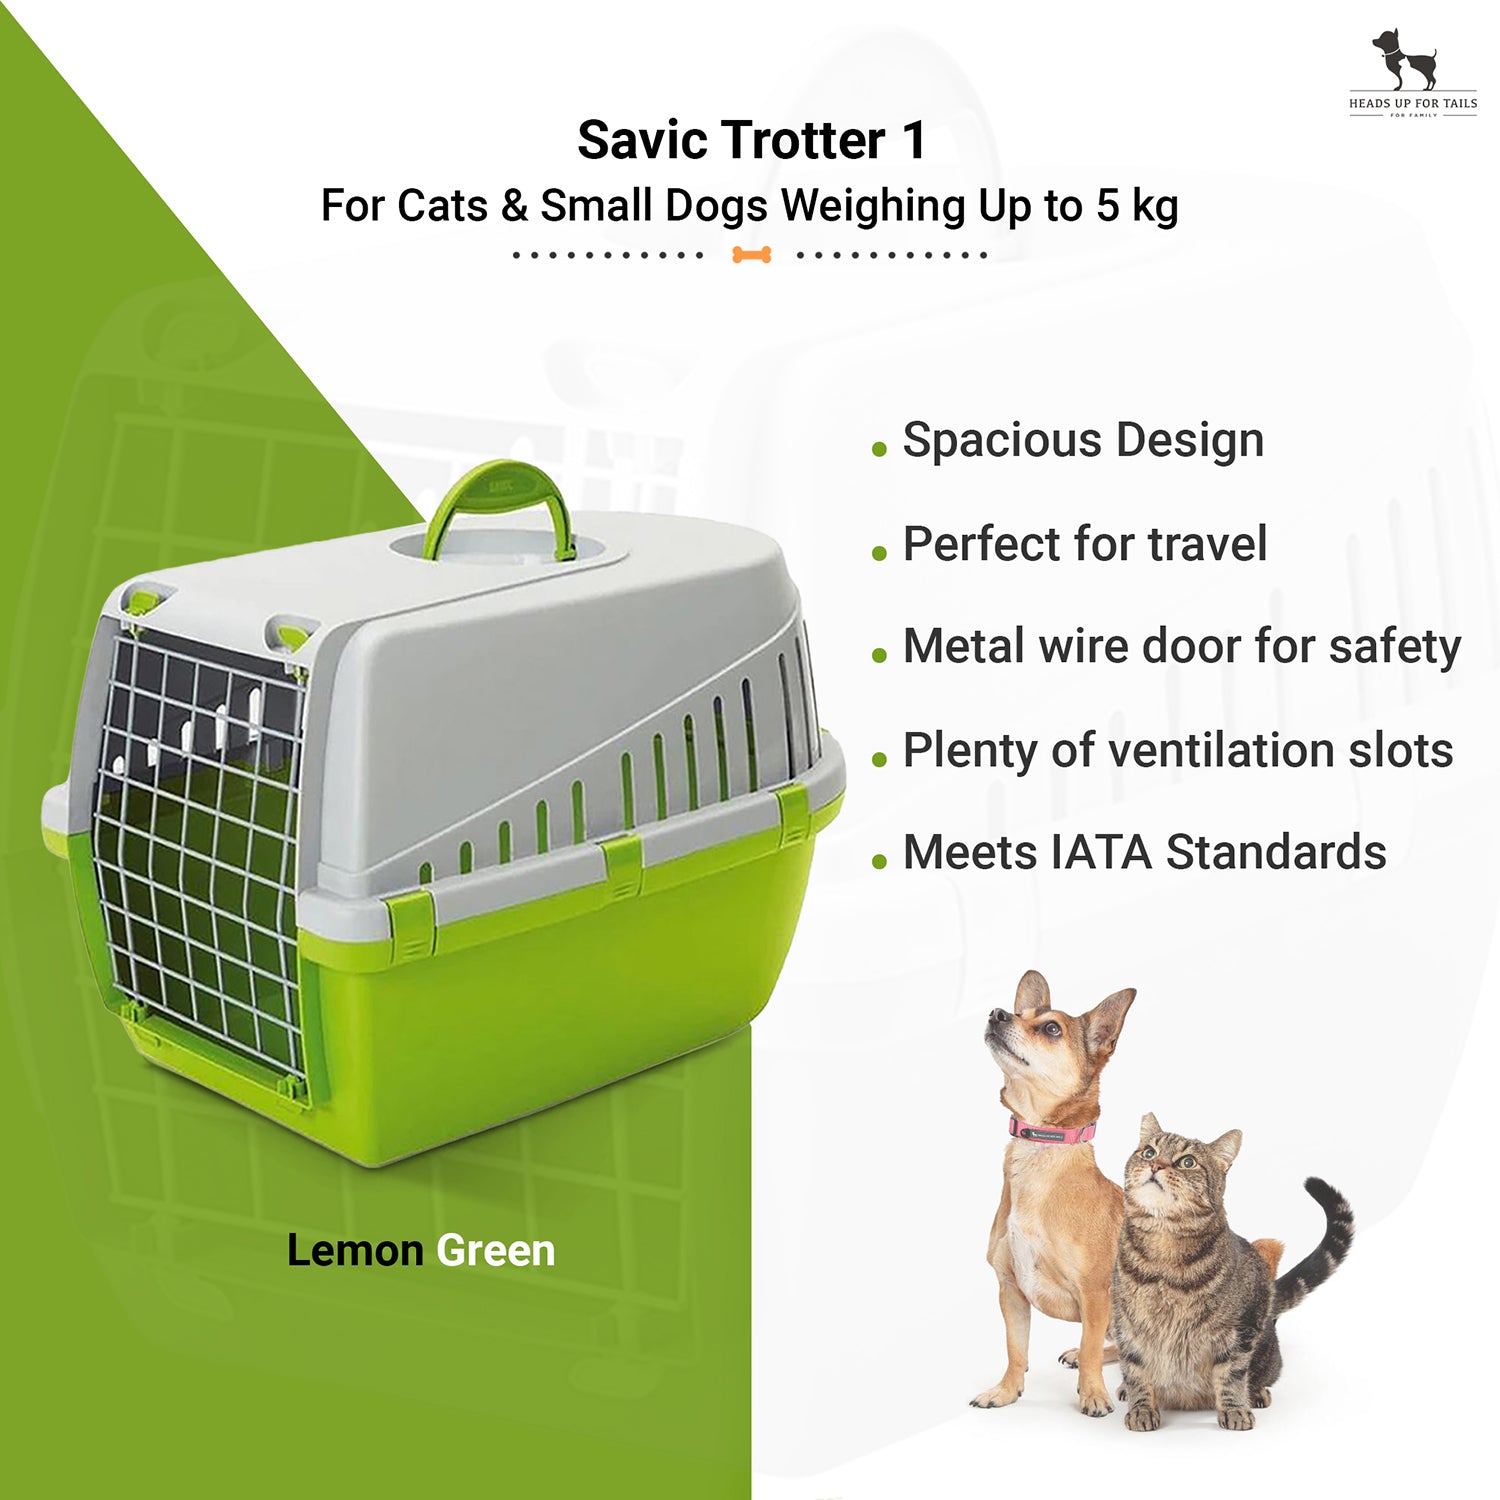 Savic Trotter 1 - Dog & Cat Carrier - Lemon Green - 19 x 13 x 12 inch - Holds up to 5 kg - Heads Up For Tails